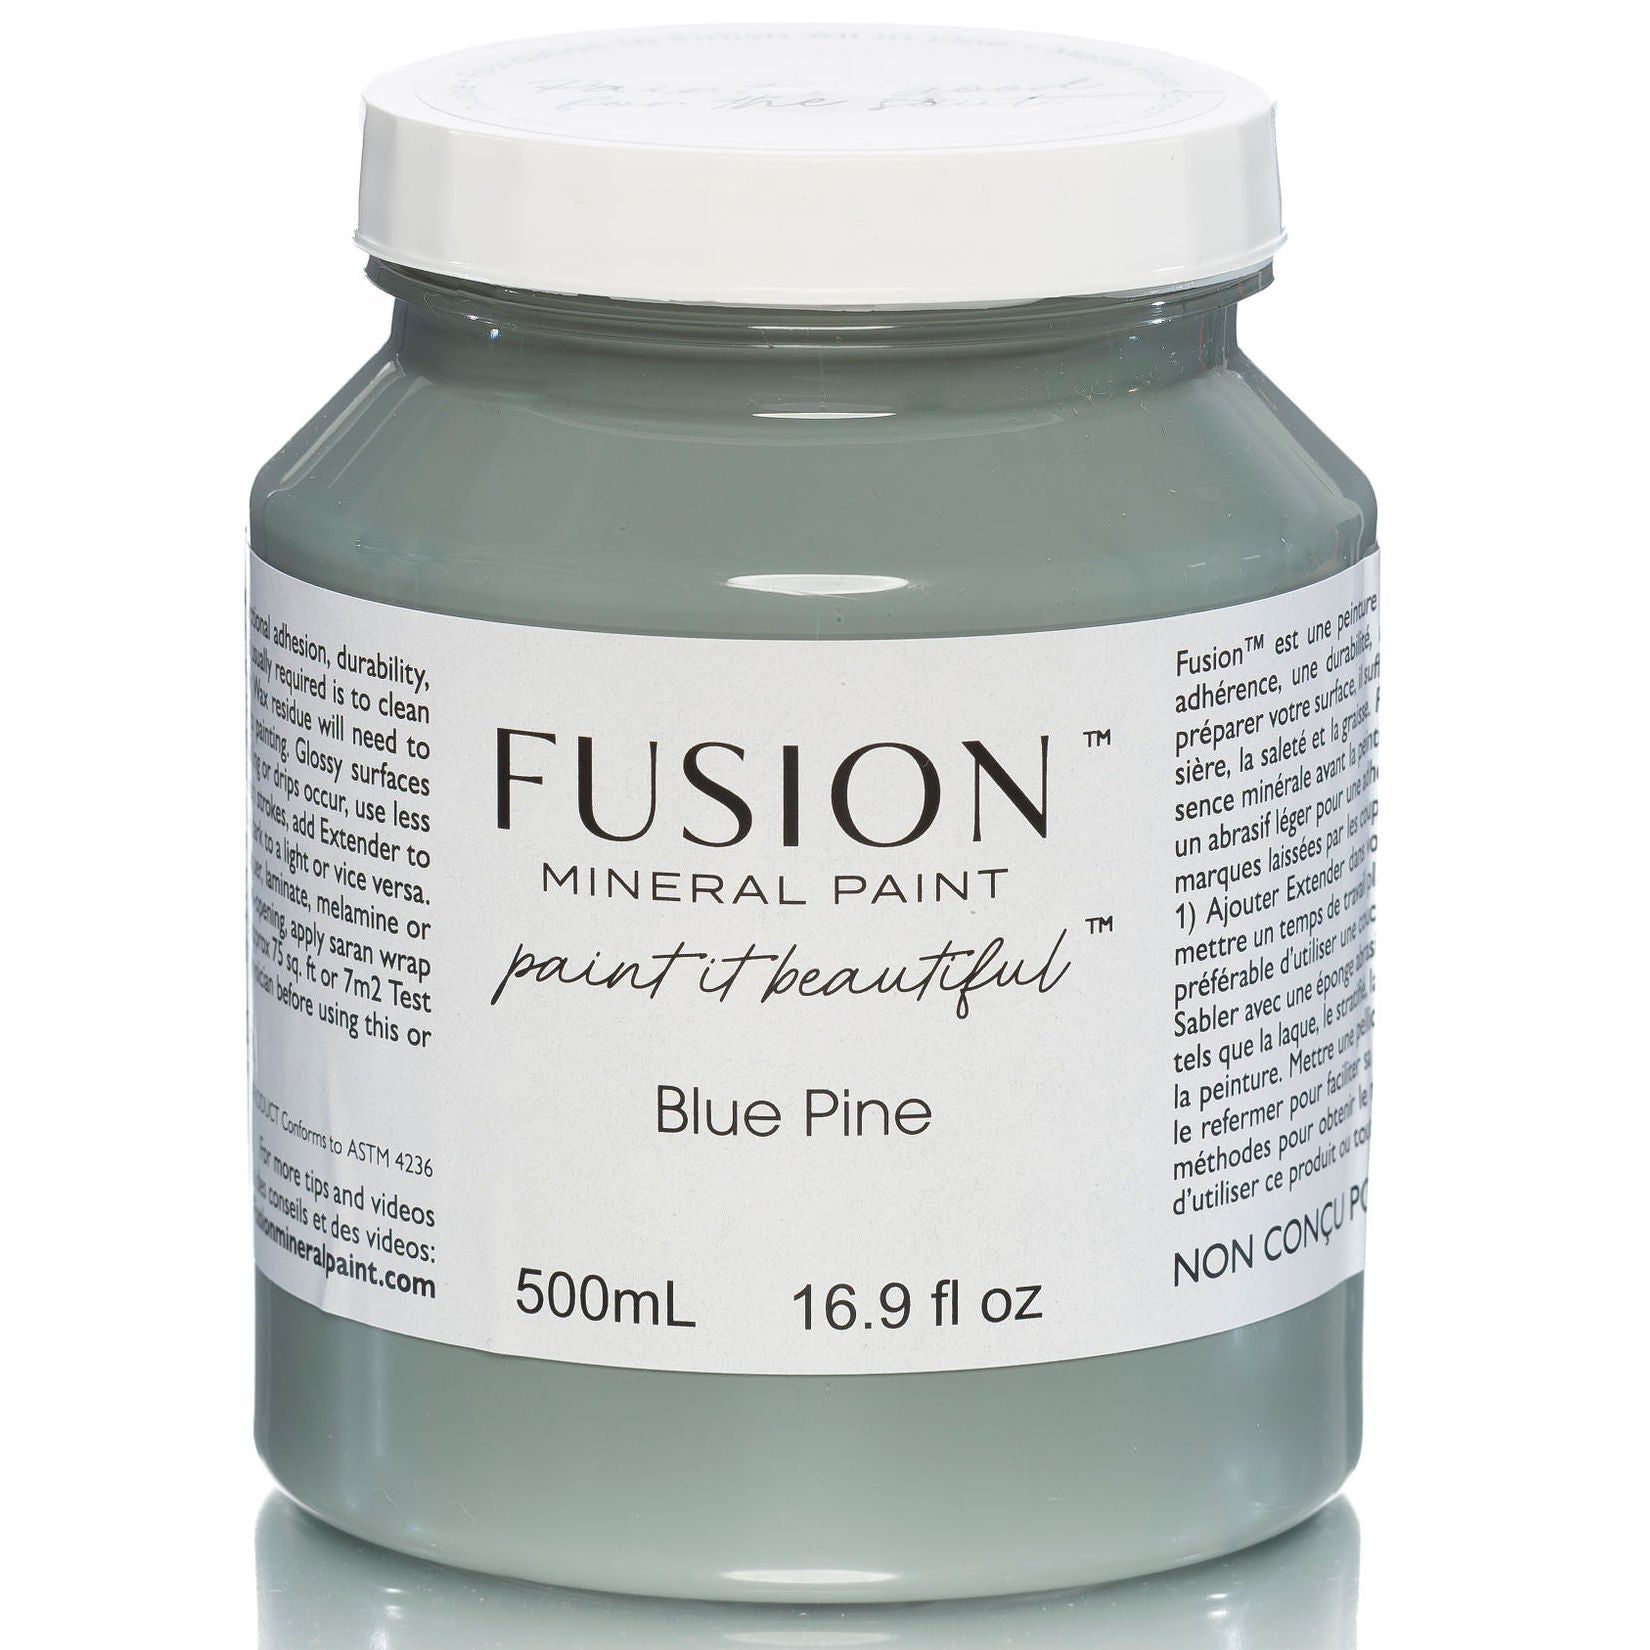 Blue Pine Fusion Mineral Paint @ Painted Heirloom